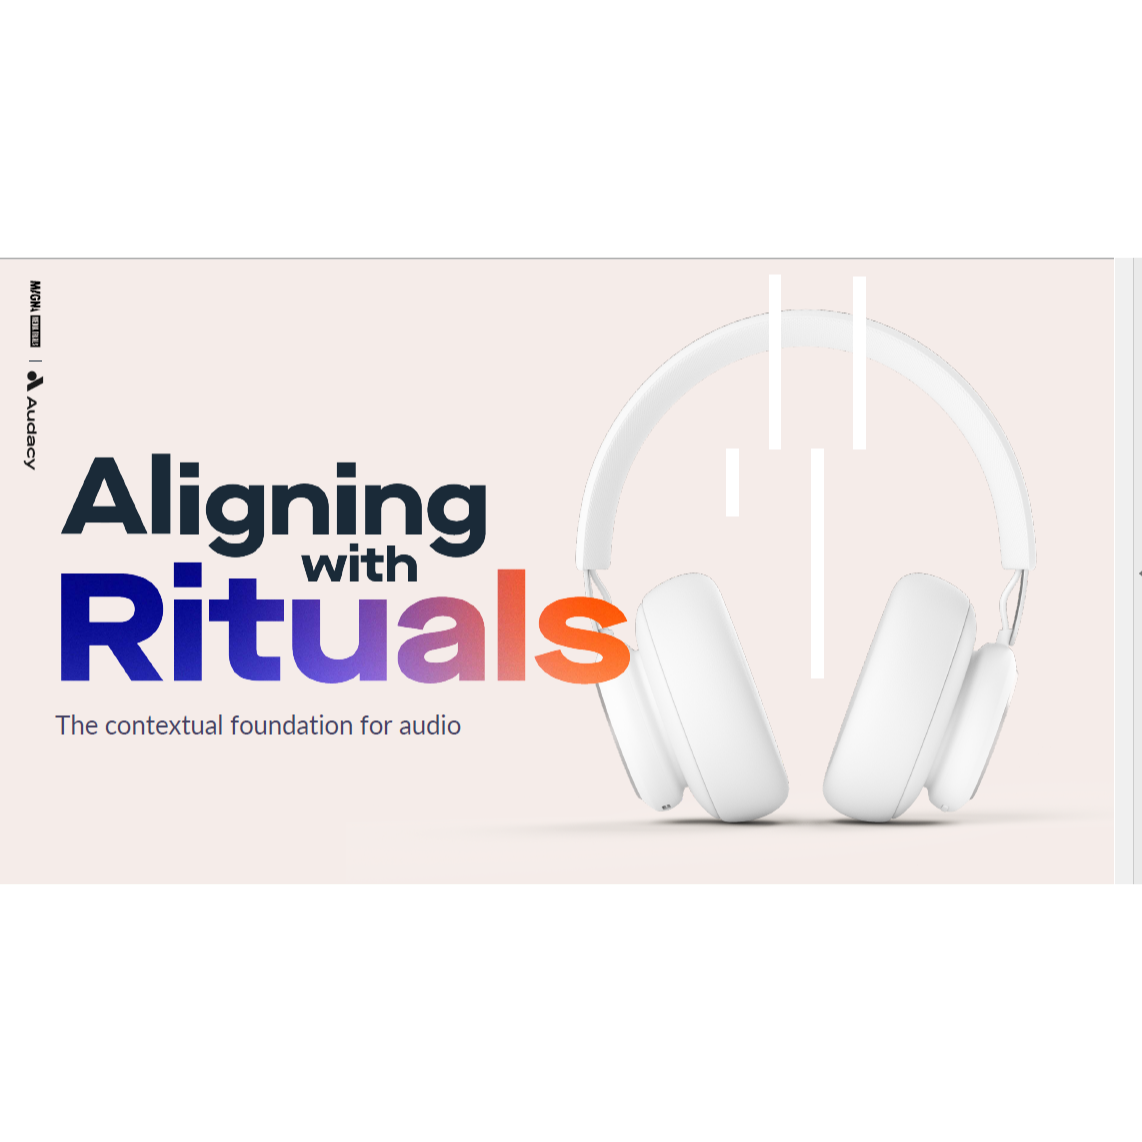 Cover image for  article: Aligning with Rituals: Contextual Alignment in Audio Advertising Boosts Brand Favorability, Search and Purchase Intent